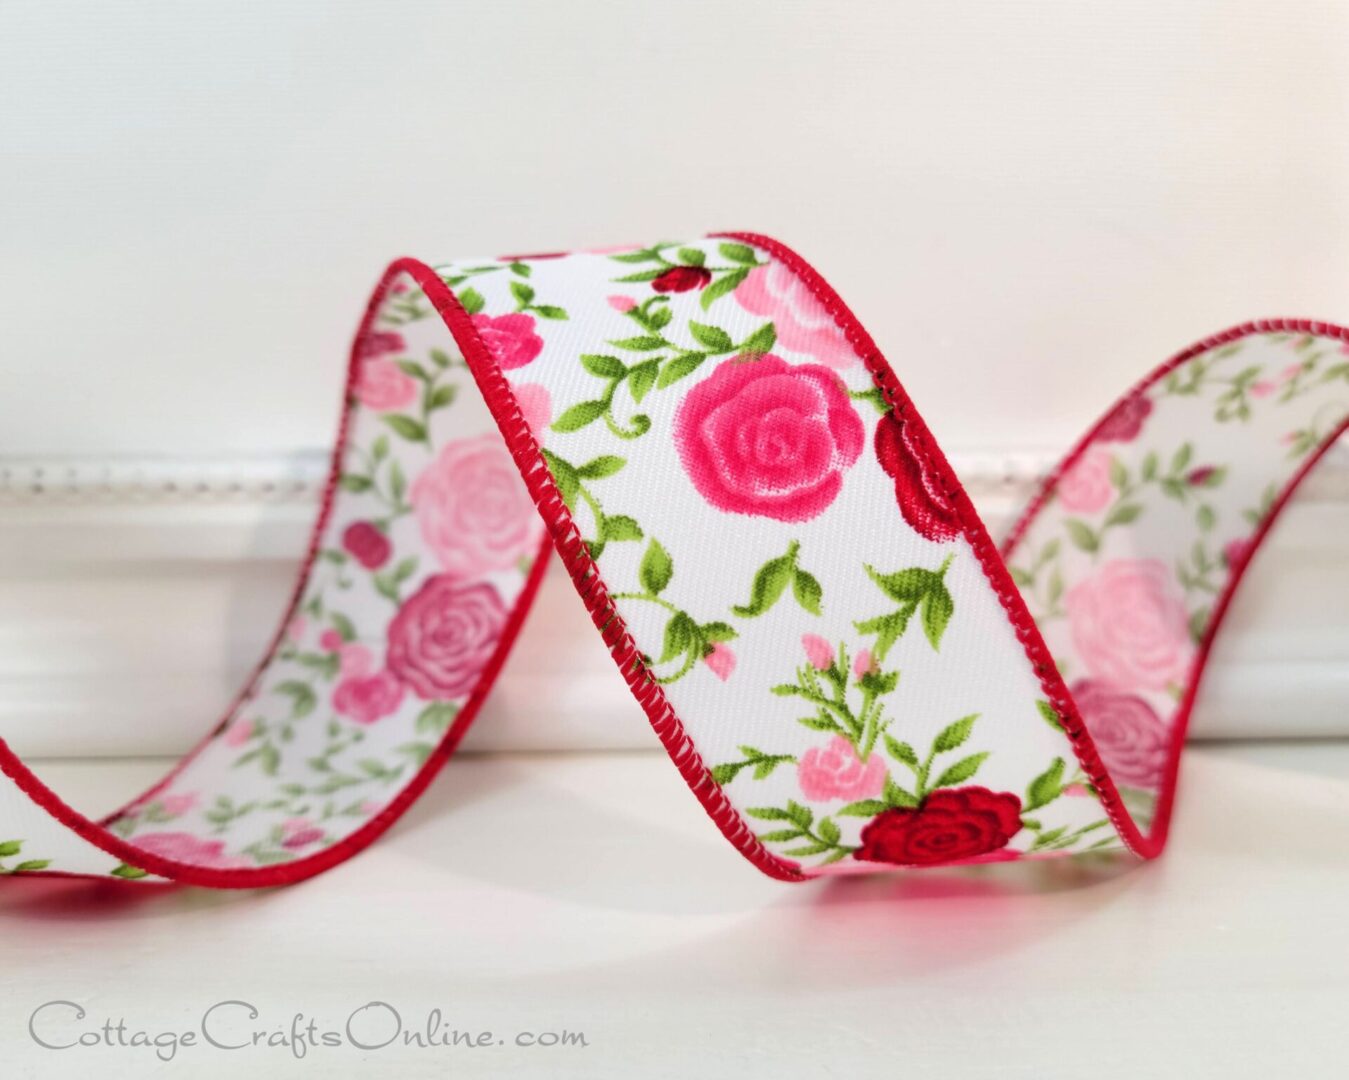 A close up of a ribbon with roses on it